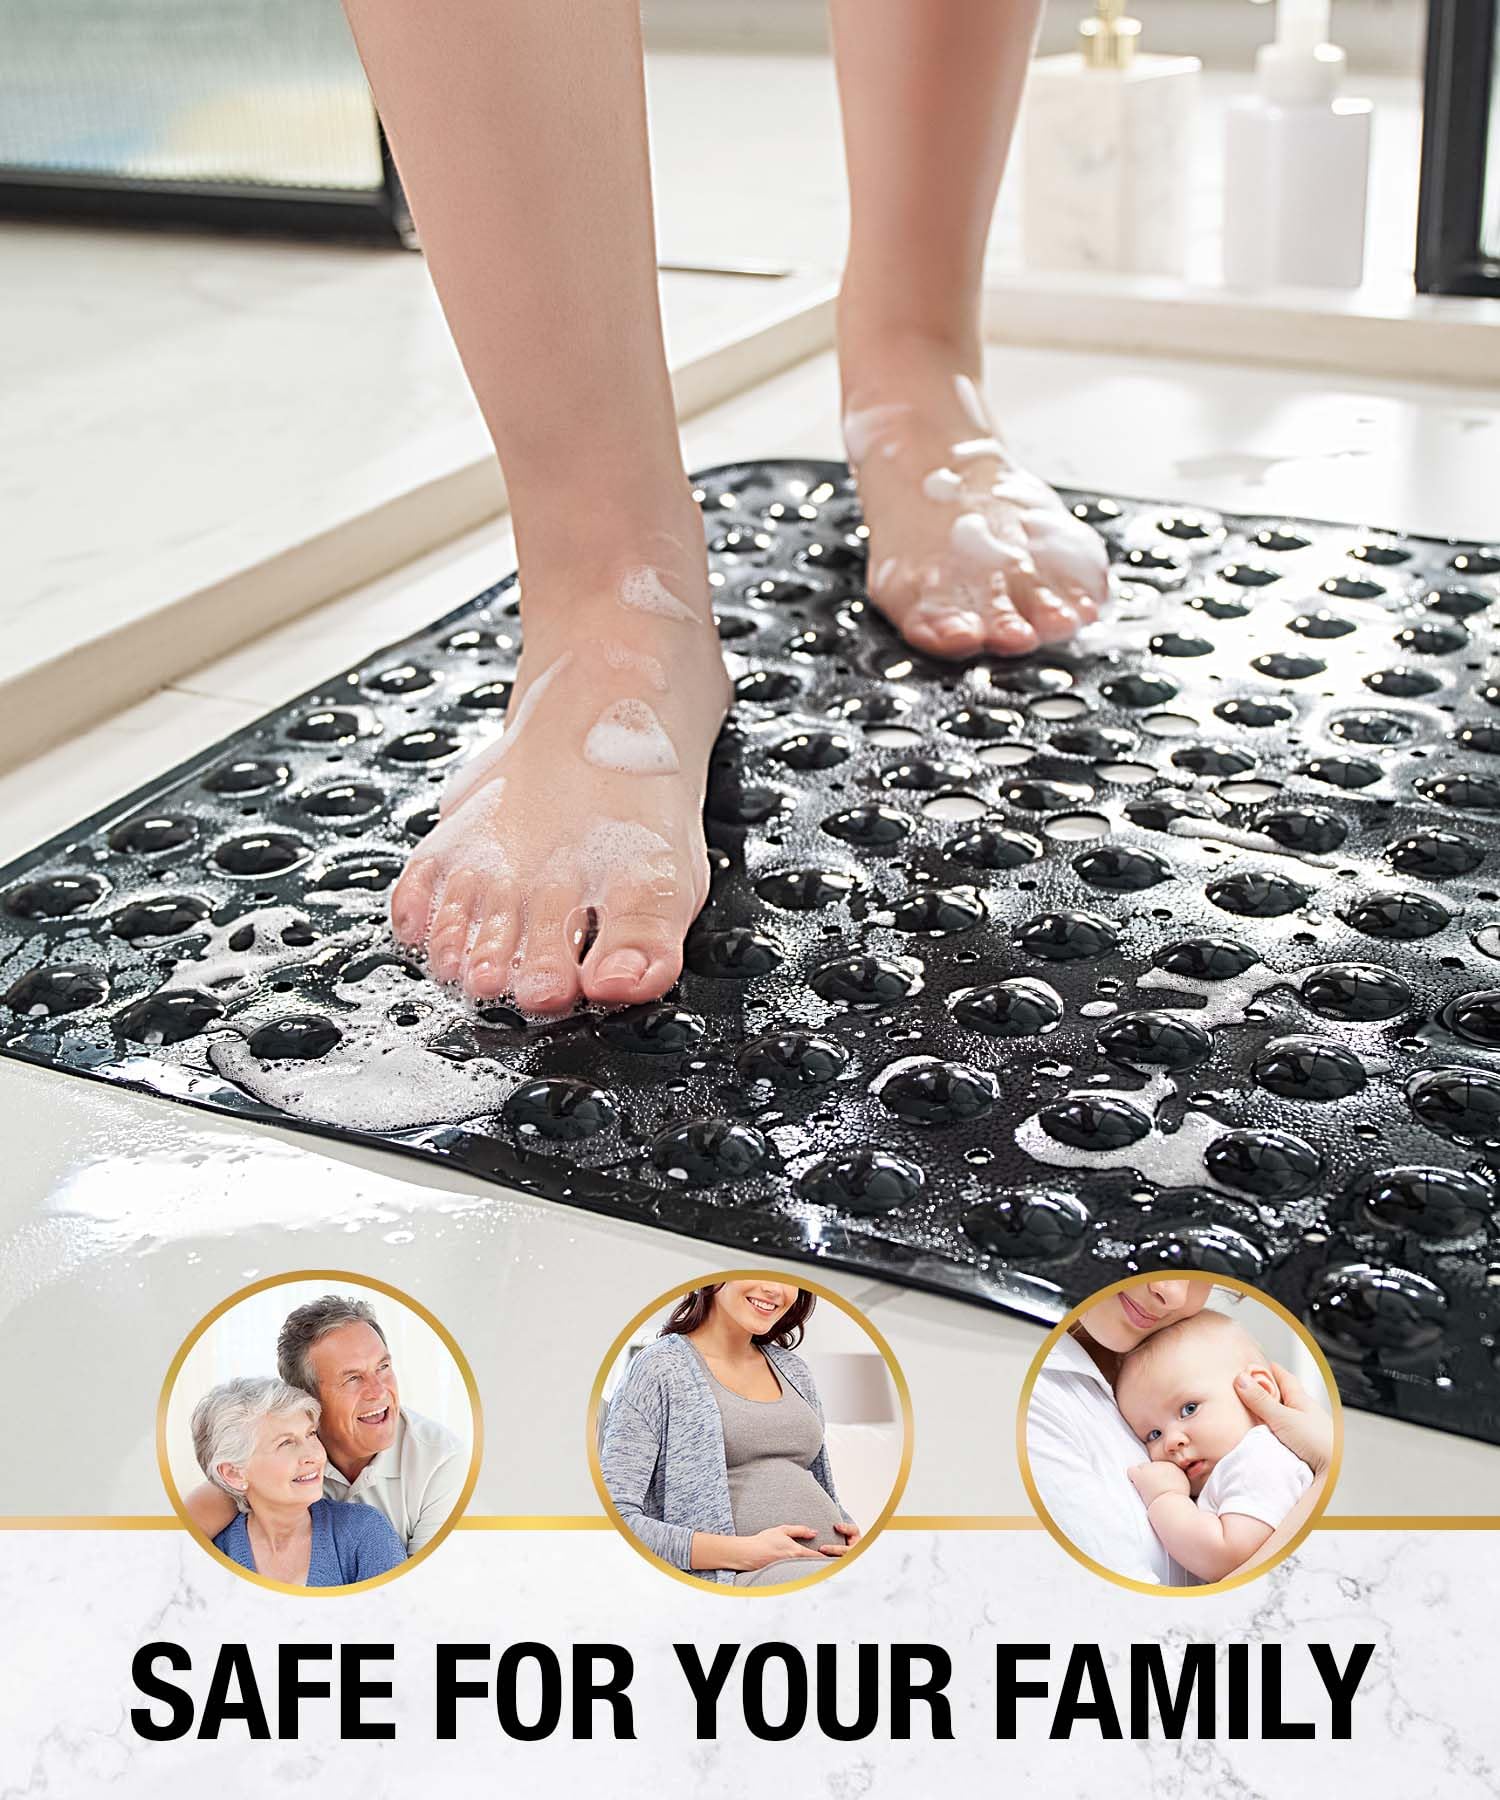 Square Shower Mat丨 21x21 Inch Bath Mat for Tub丨With Suction Cups and Drain Holes丨Machine Washable Bathroom Shower Stall Floor Mat